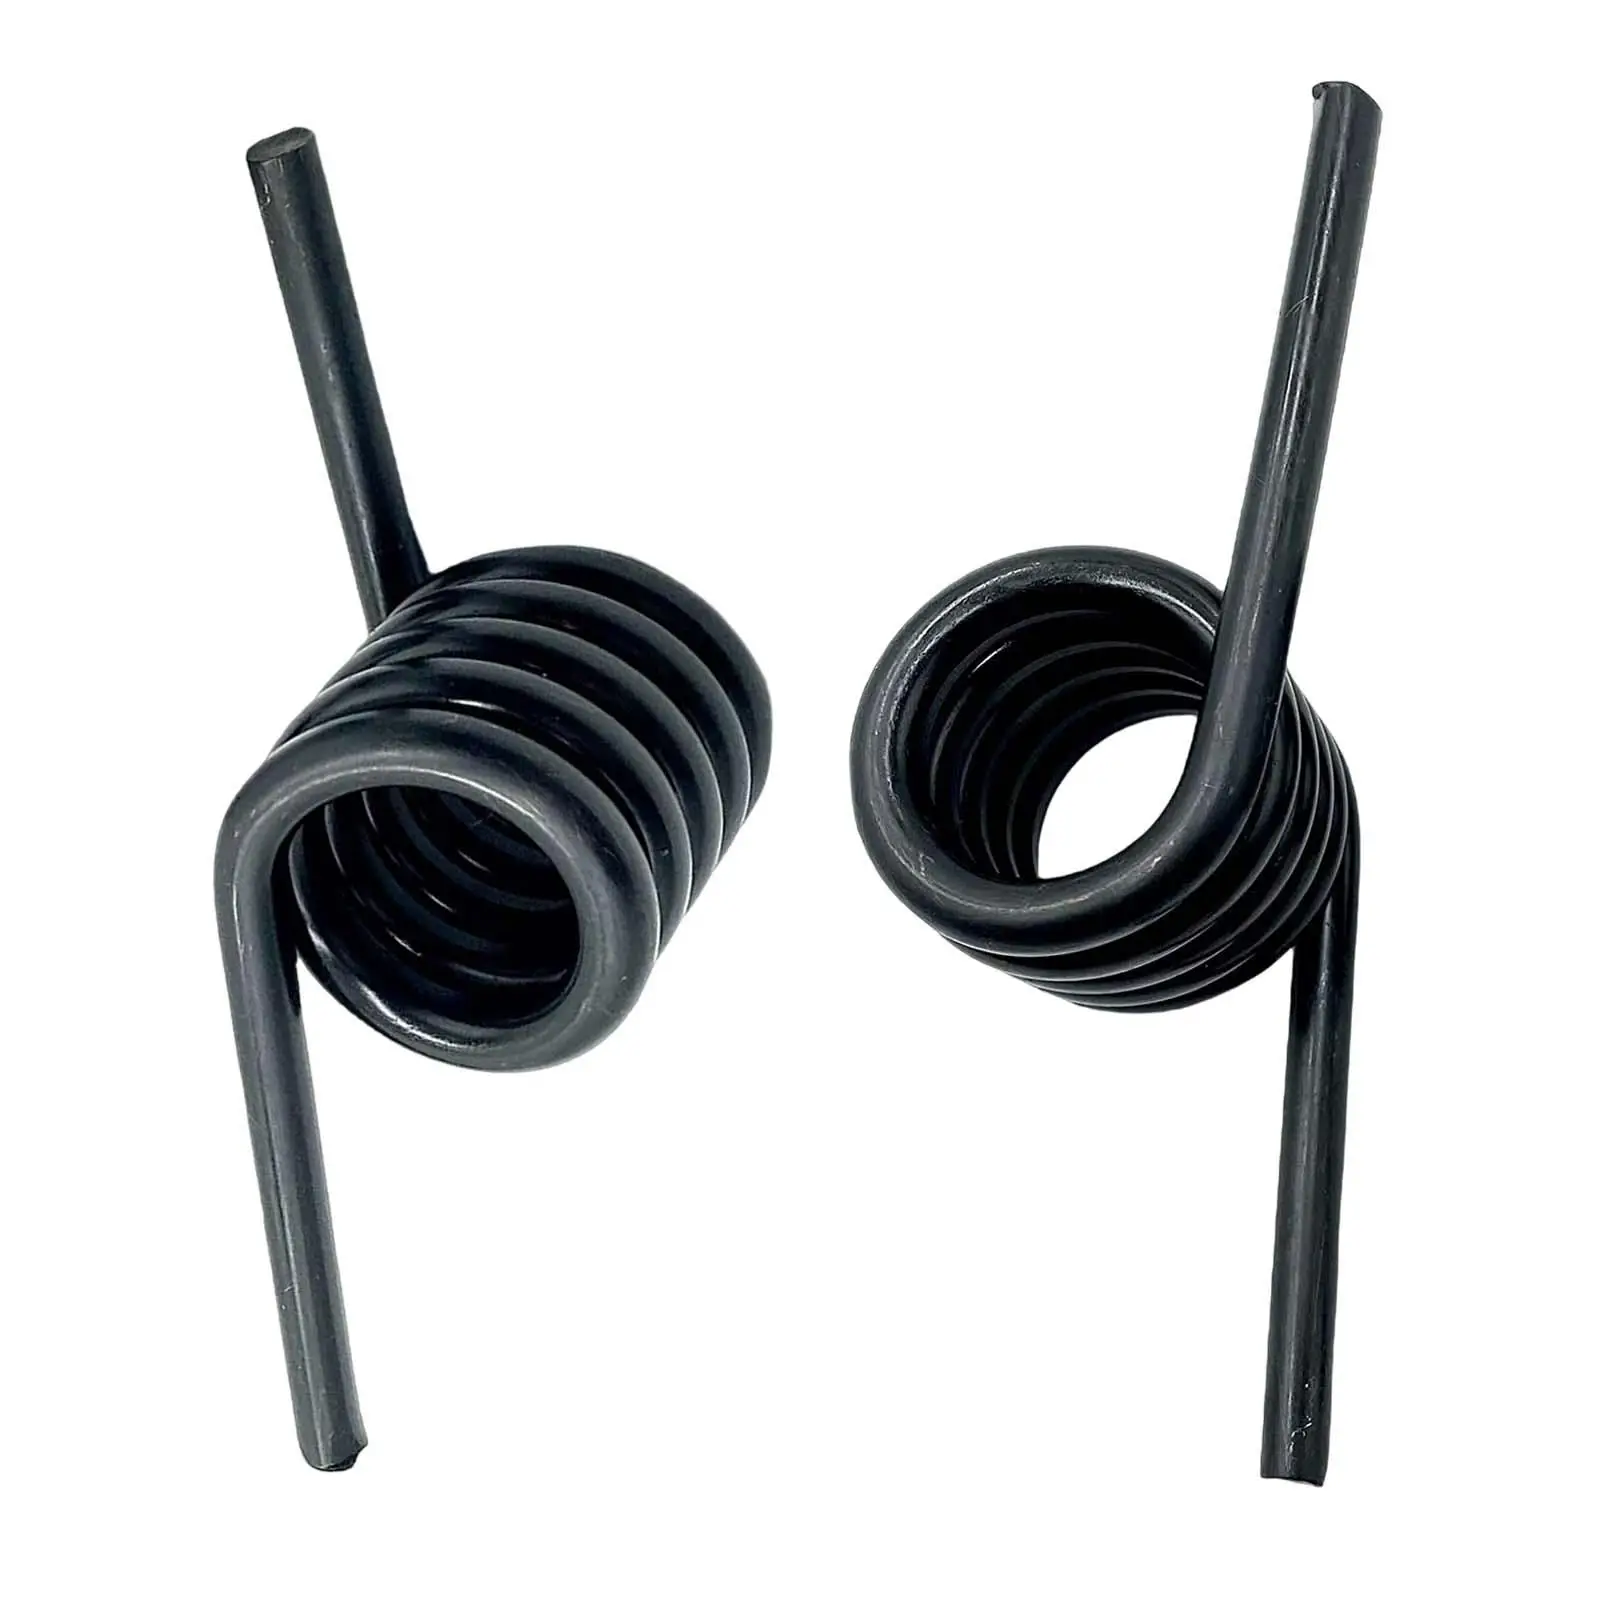 2x Trailer Torsion Ramp Springs 3034278 Left & Right Hand Black Replacement Part High Strength for Trailer Ramps